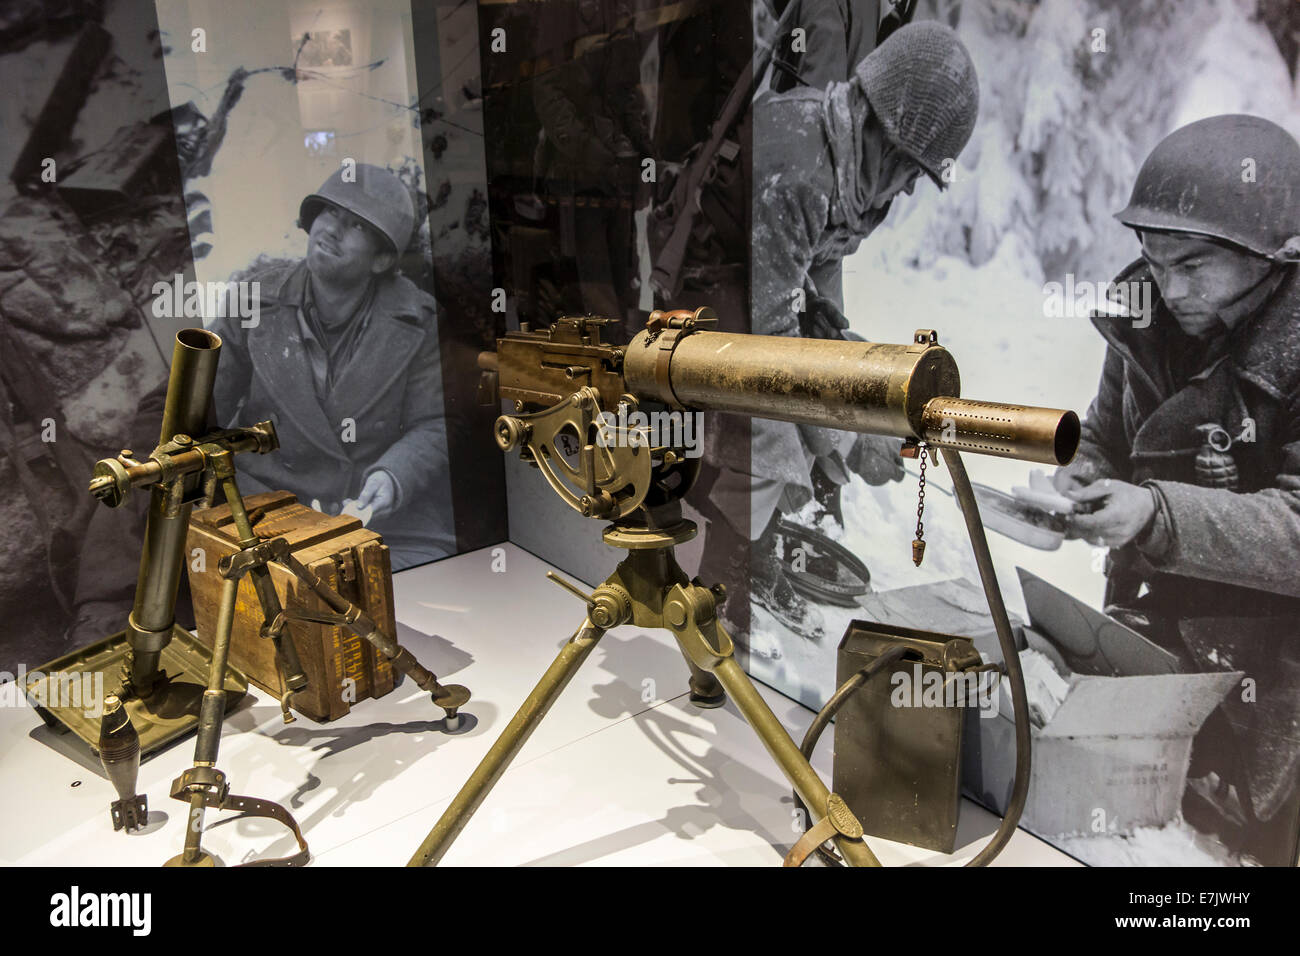 American M1917 Browning machine gun and M2 Mortar in the Bastogne War Museum about World War Two, Belgian Ardennes, Belgium Stock Photo